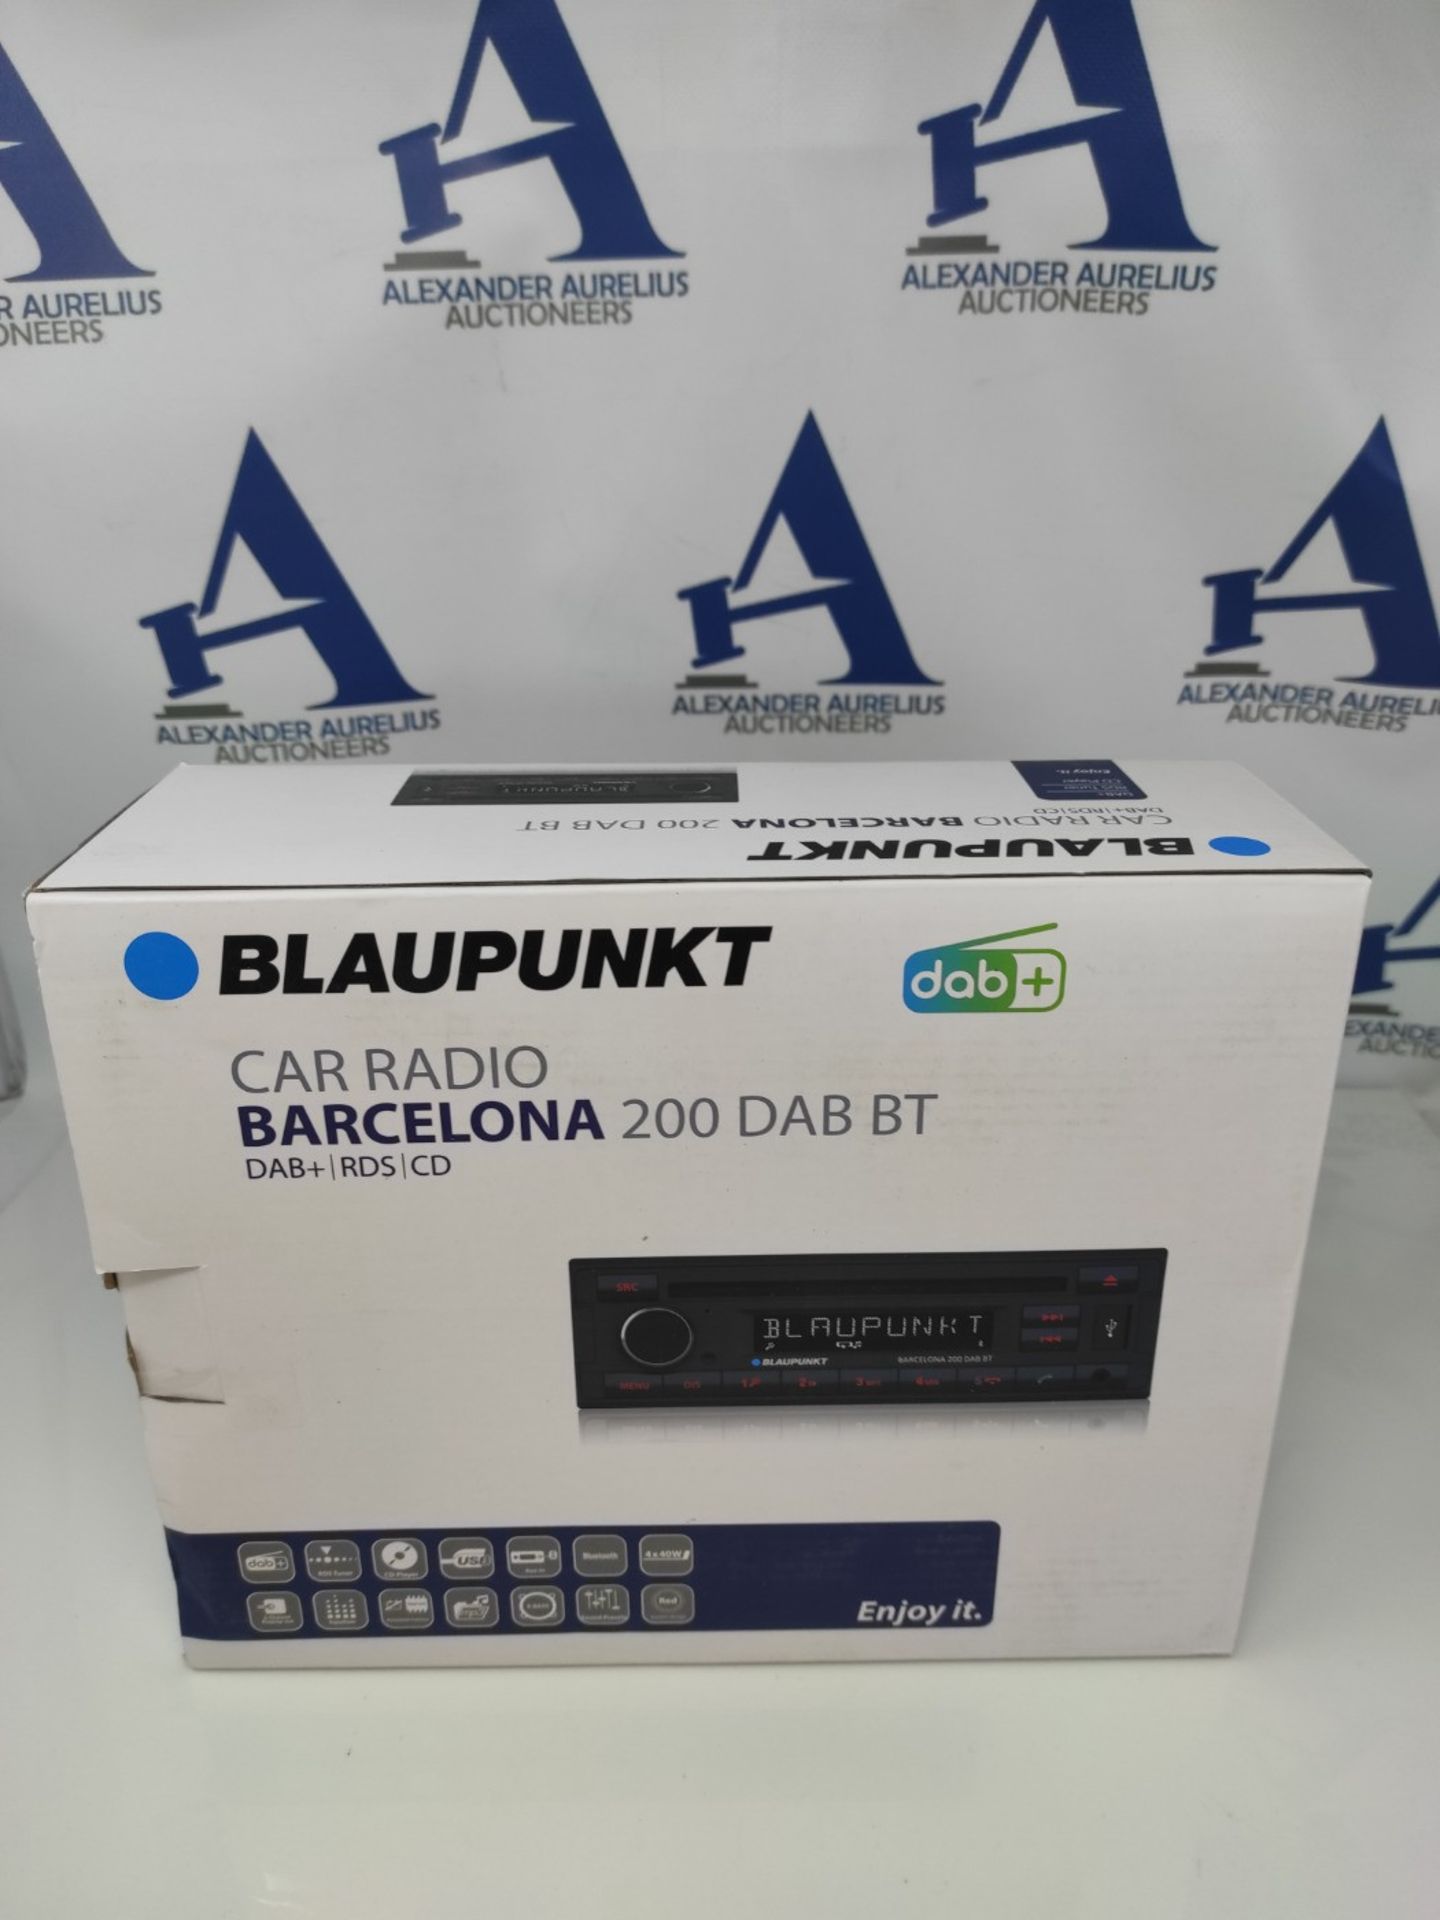 RRP £141.00 Blaupunkt Barcelona 200 DAB BT Car Radio with Bluetooth Hands-Free Calling, DAB+ Tuner - Image 2 of 3